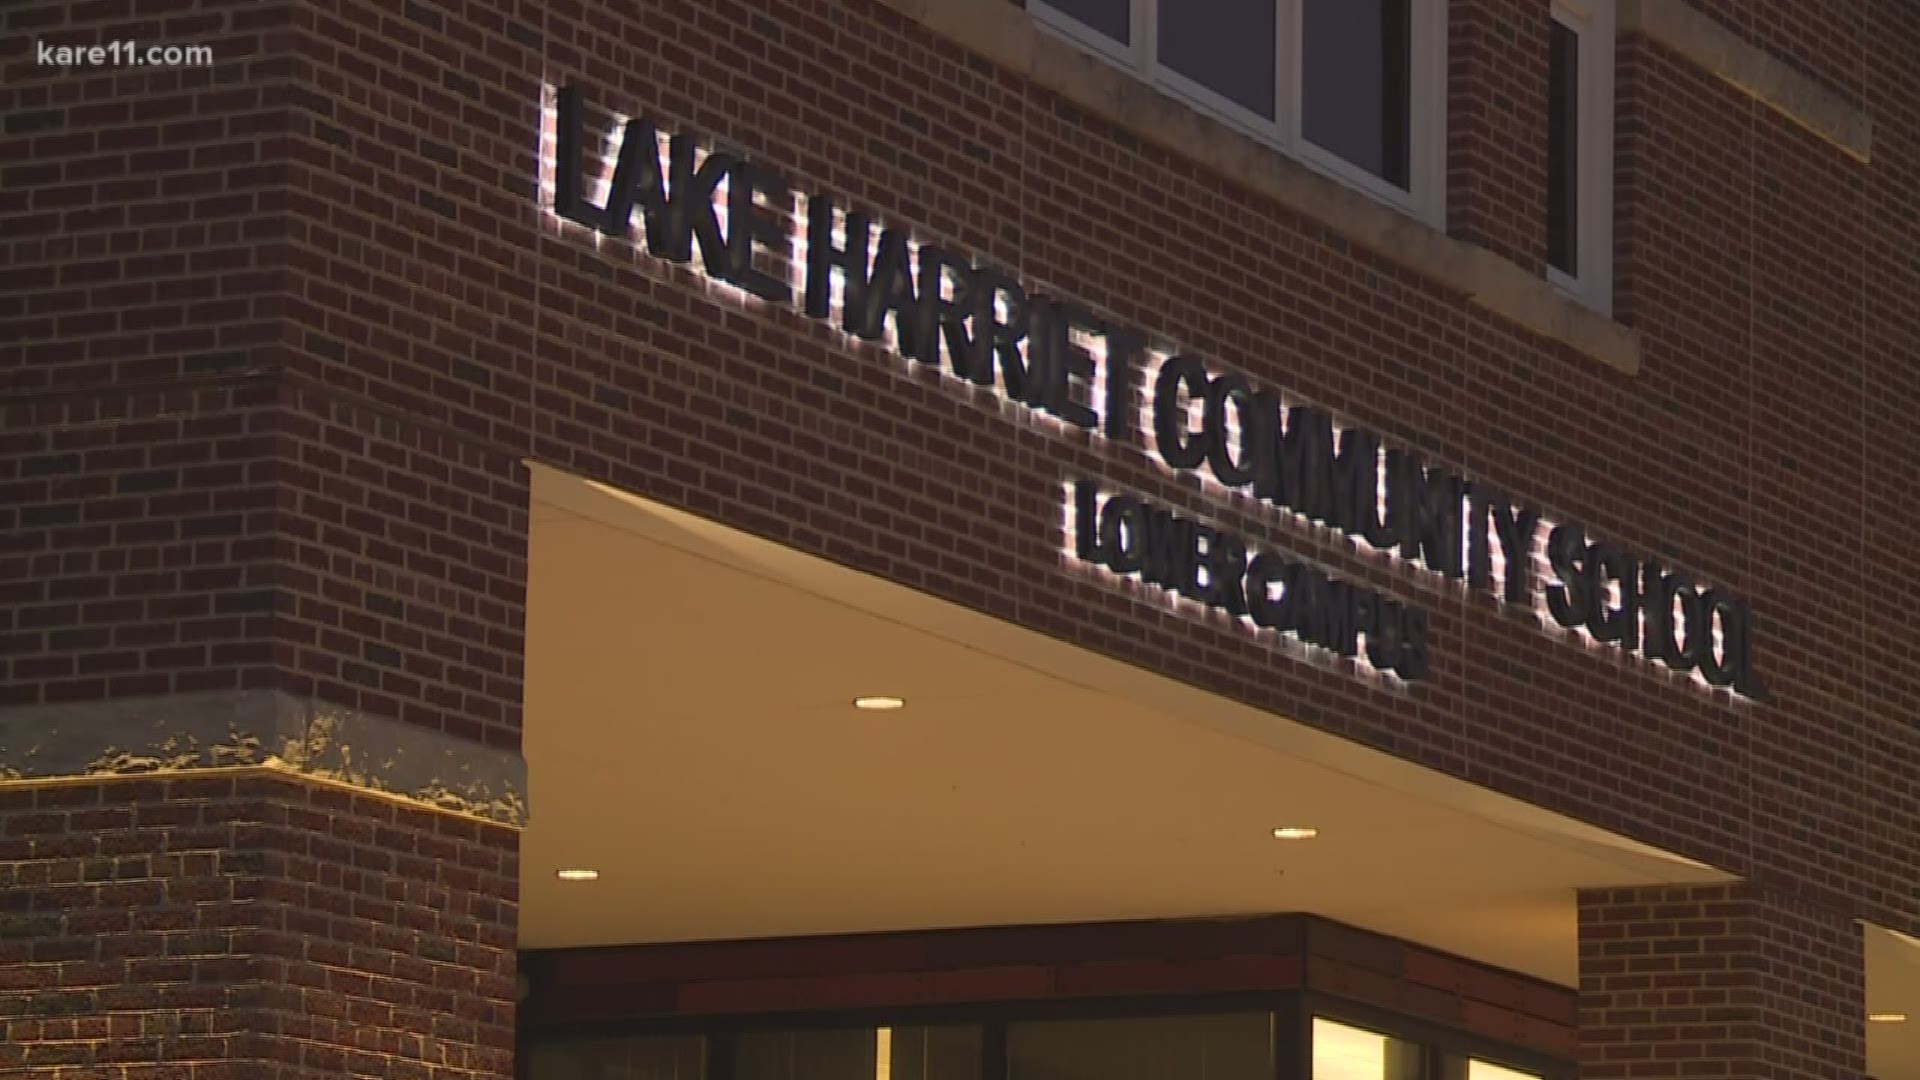 A Lake Harriet Elementary School student escapes an attempted abduction outside the school.